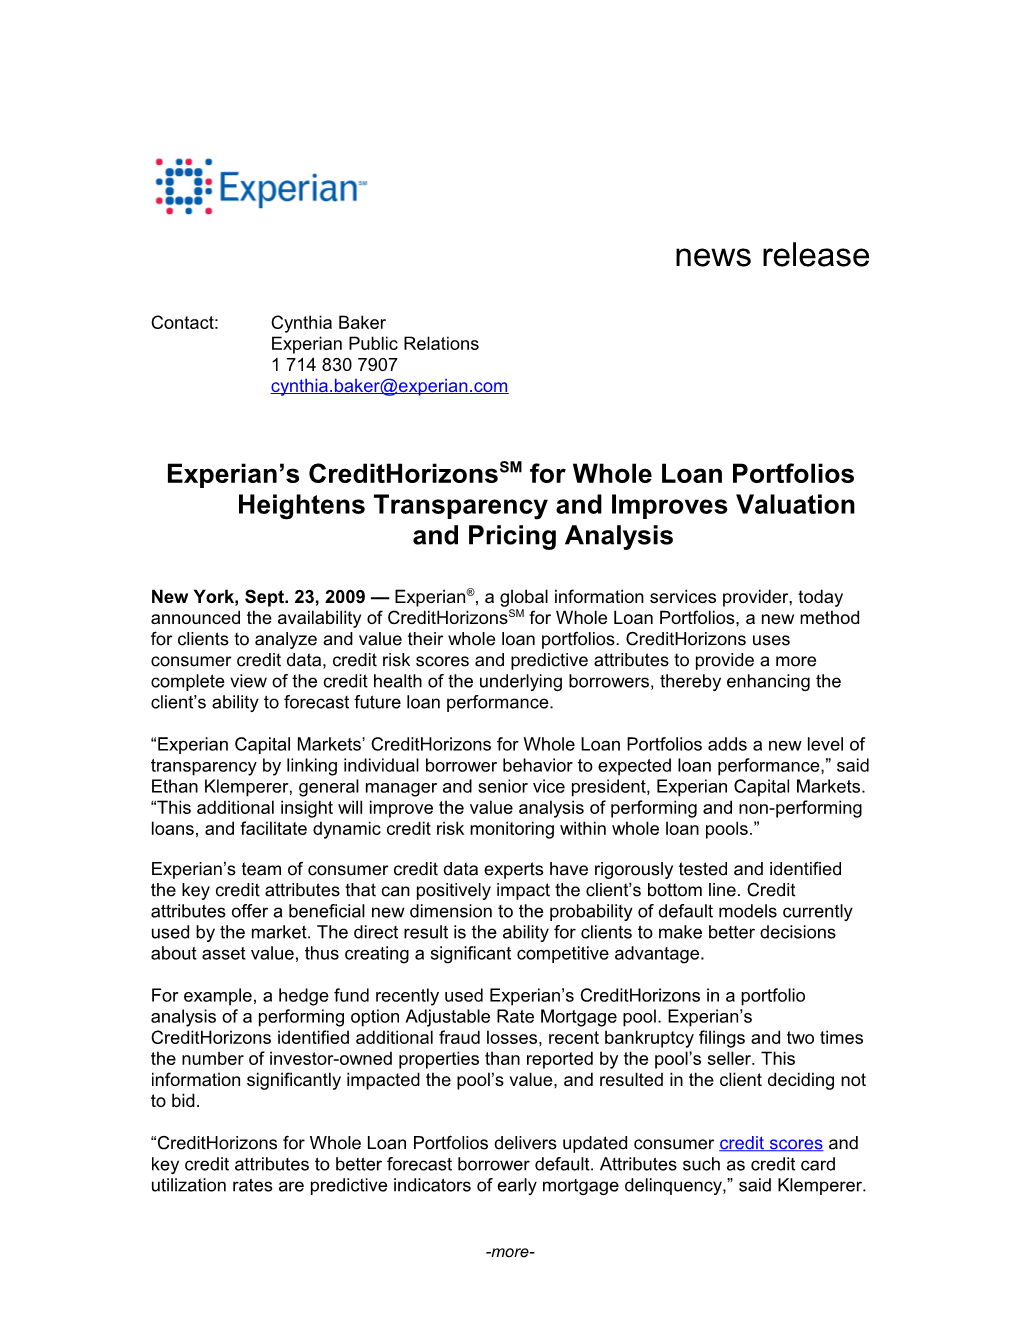 Experian S Credithorizonssm Heightens Transparency and Improves Valuation and Pricing Analysis